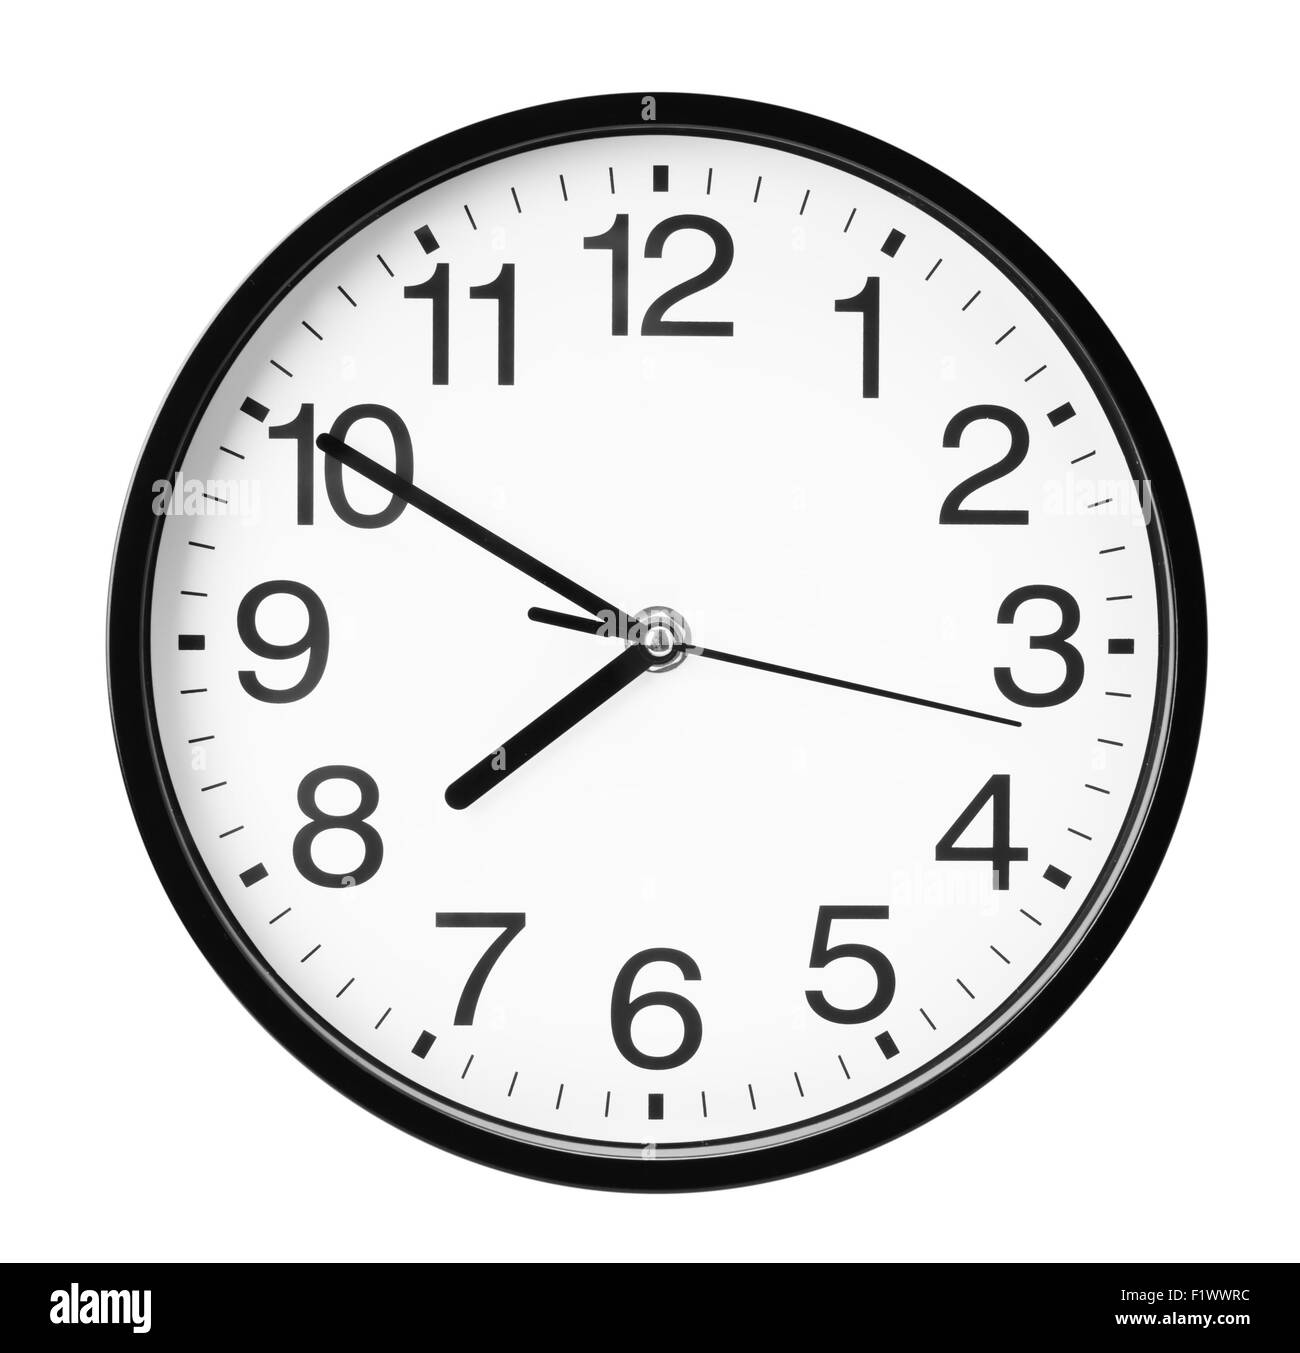 wall clock isolated on the white background. Stock Photo